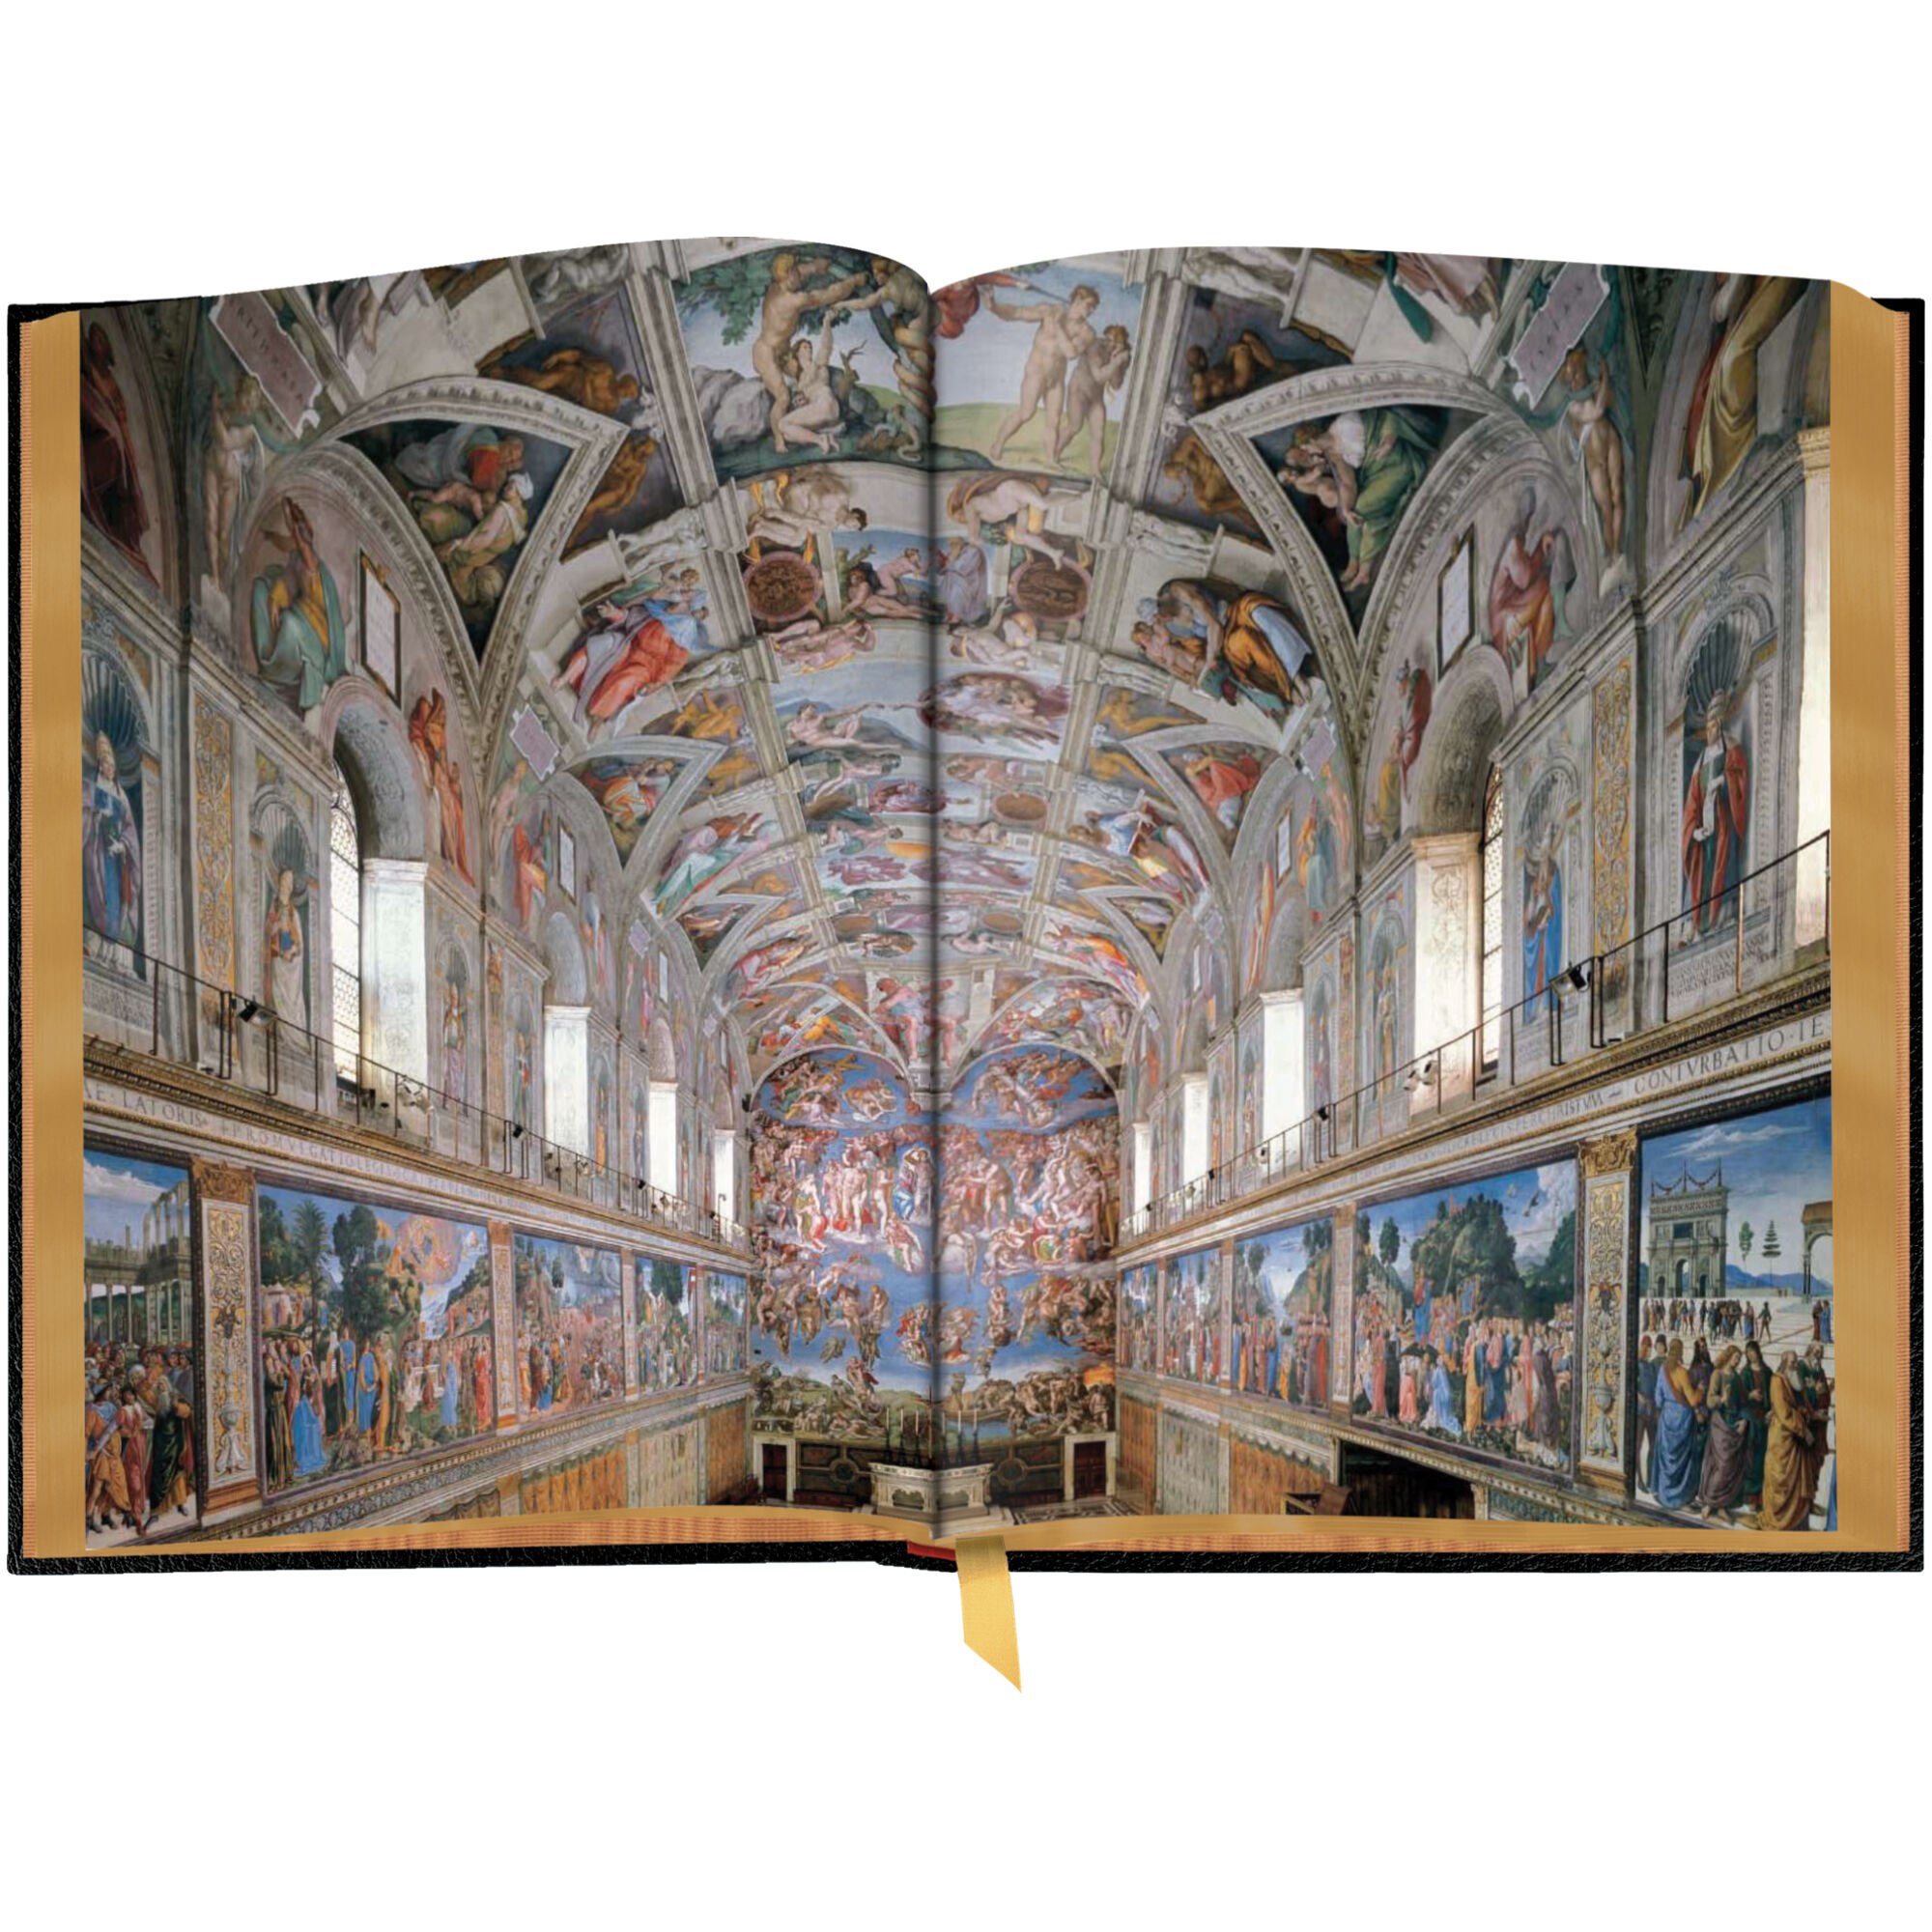 MICHELANGELO: The Complete Painting, Sculptures & Architecture